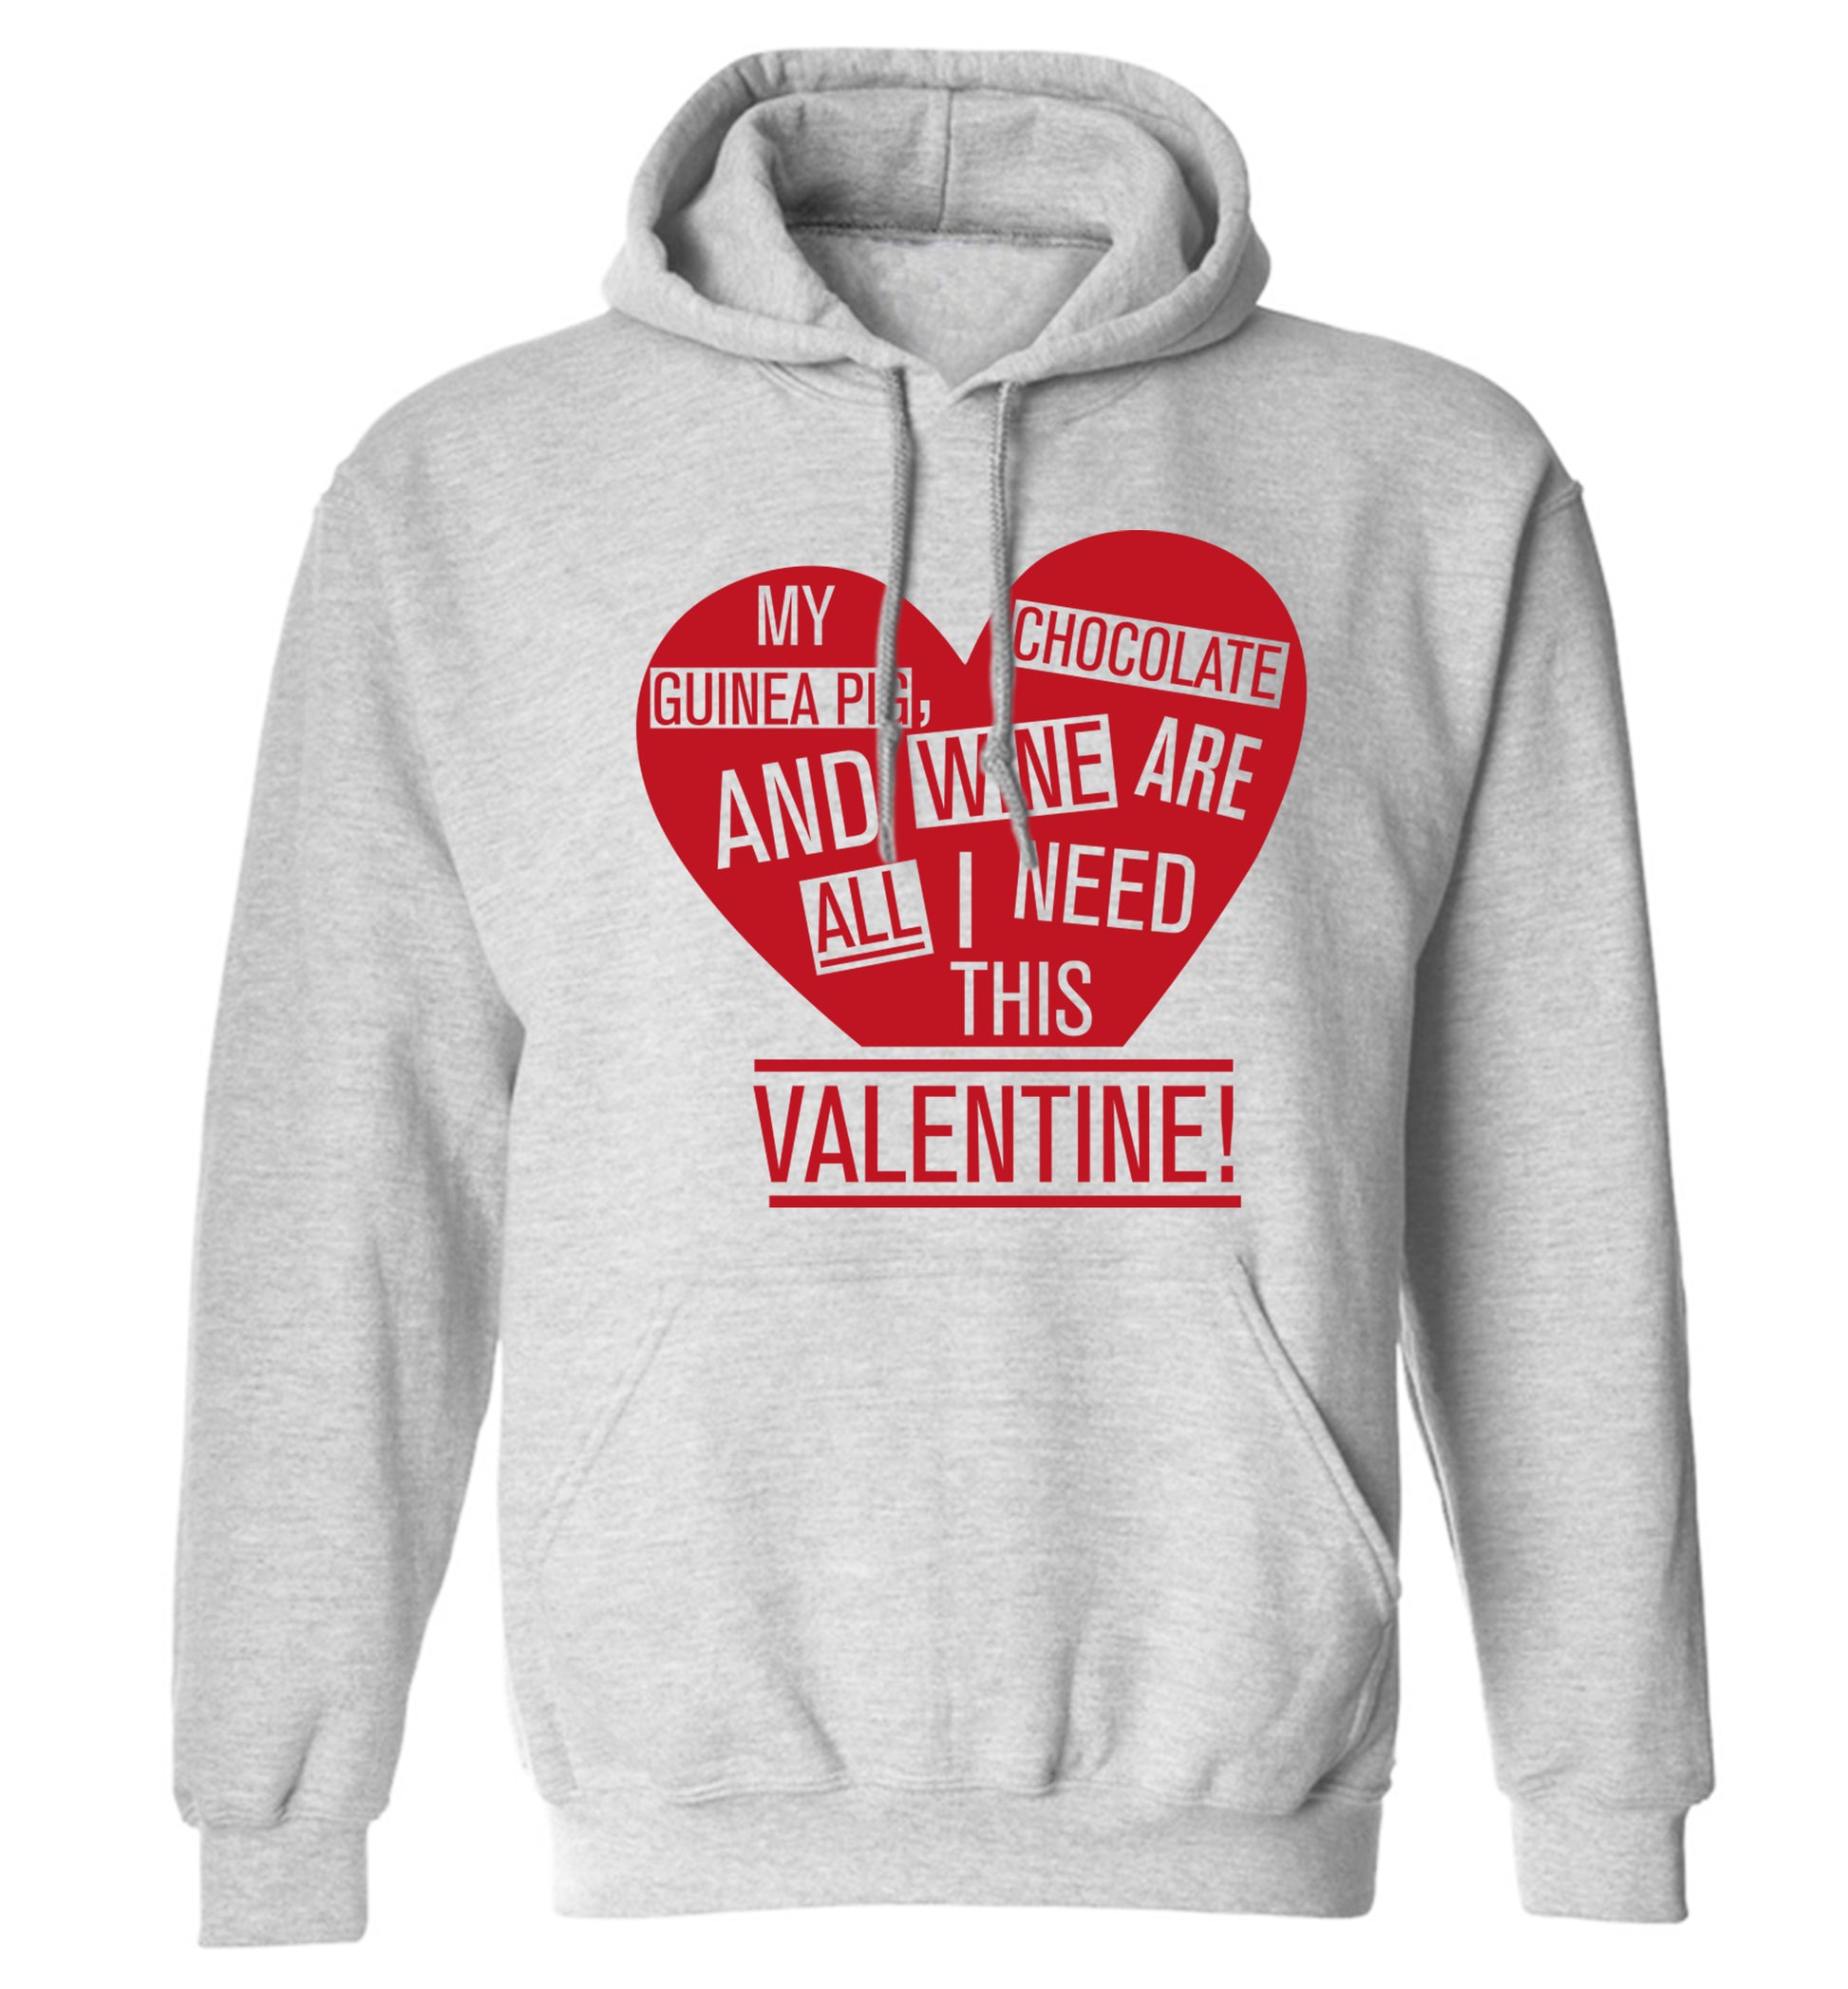 My guinea pig, chocolate and wine are all I need this valentine! adults unisex grey hoodie 2XL